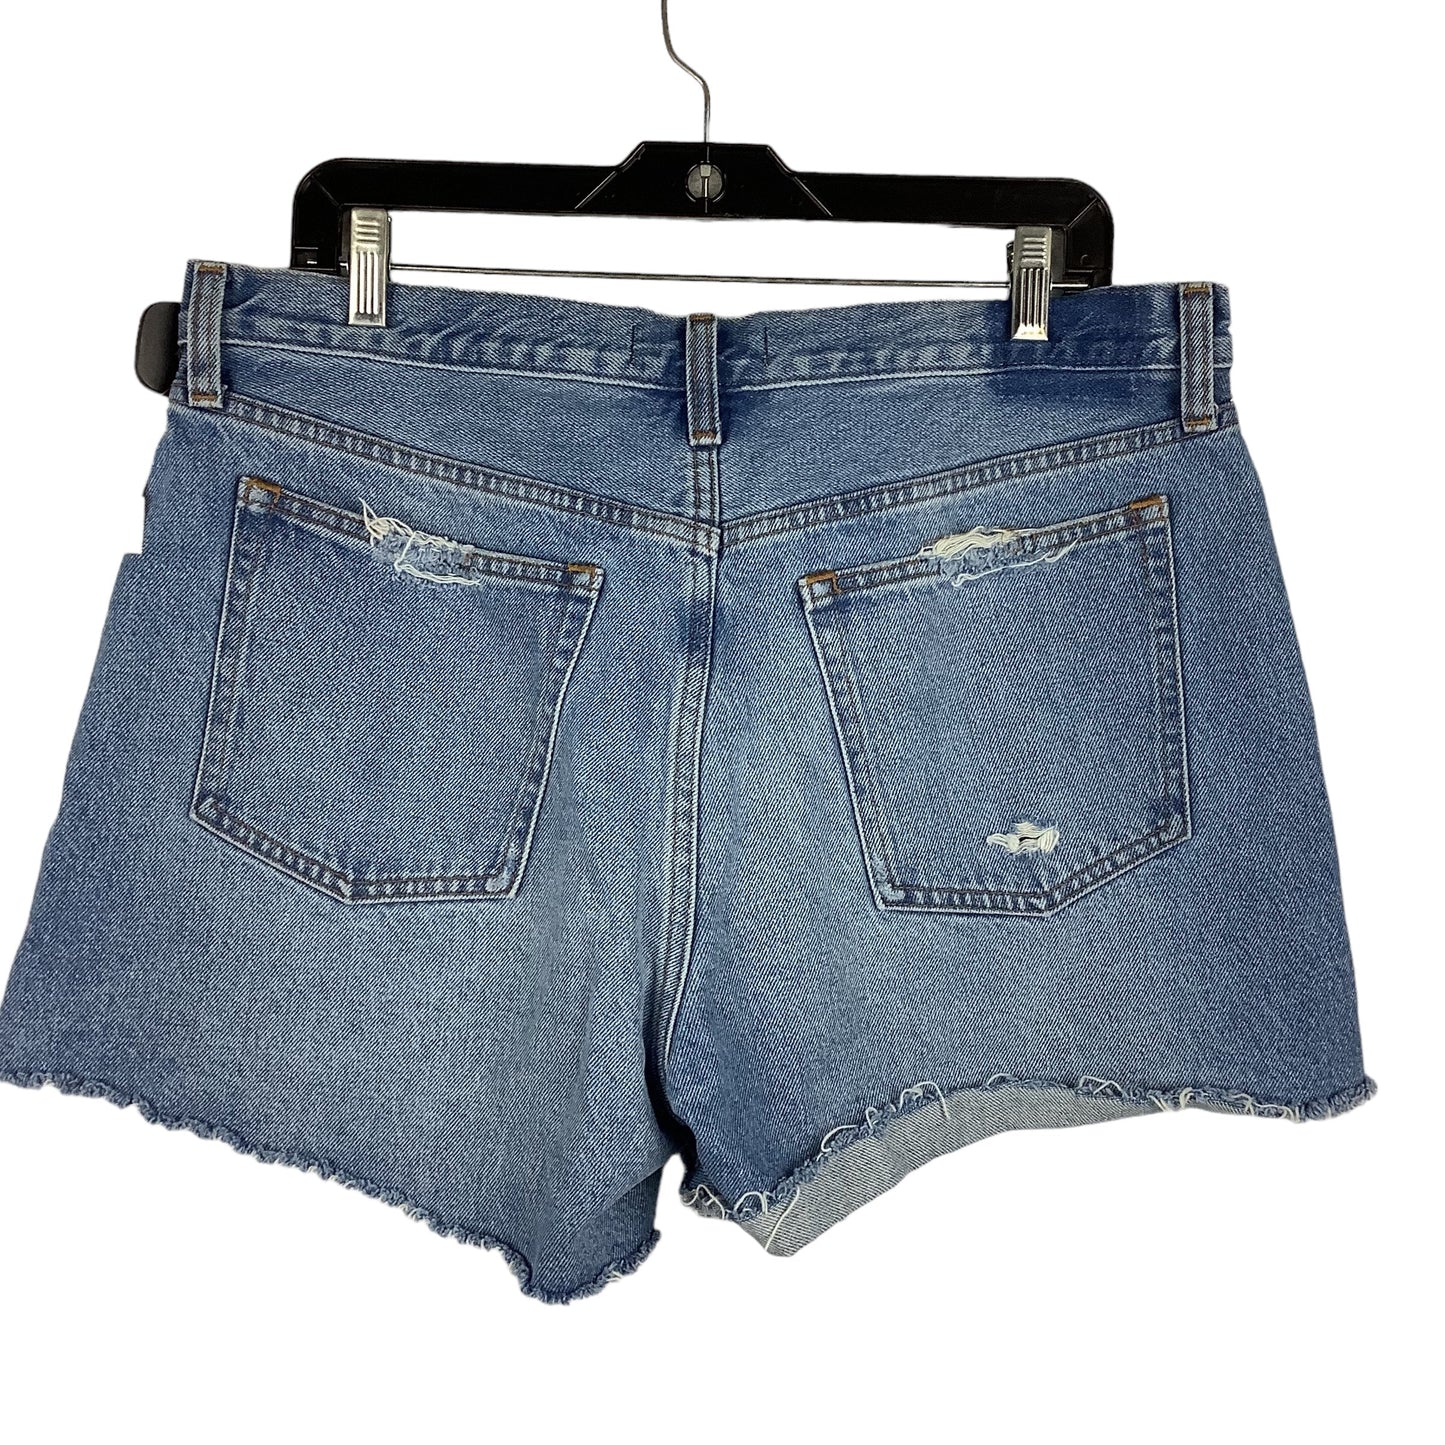 Blue Denim Shorts Abercrombie And Fitch, Size 12